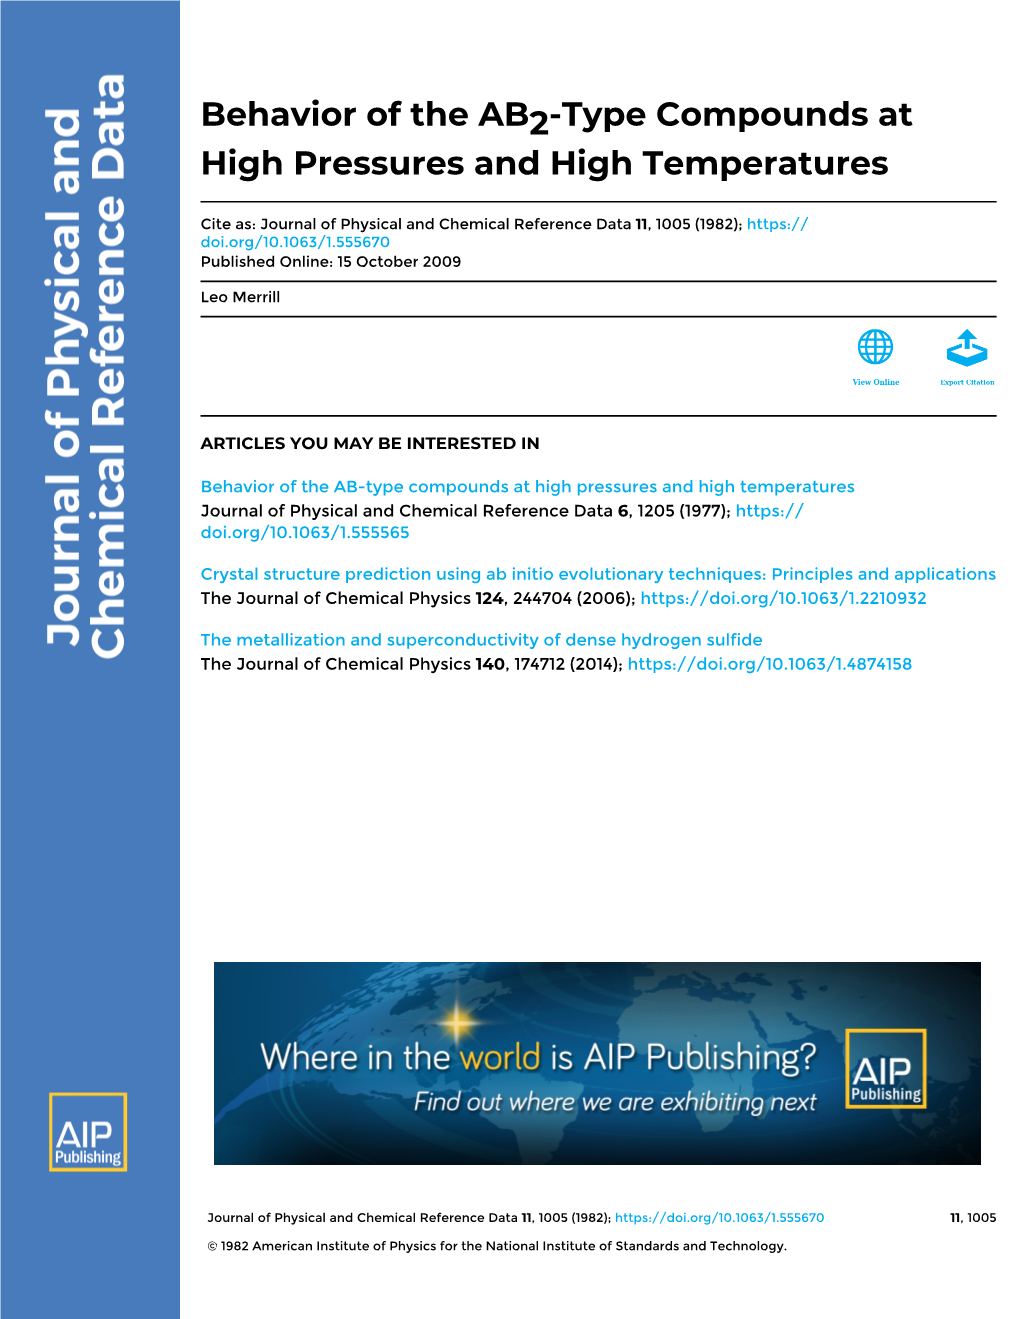 Behavior of the AB2-Type Compounds at High Pressures and High Temperatures